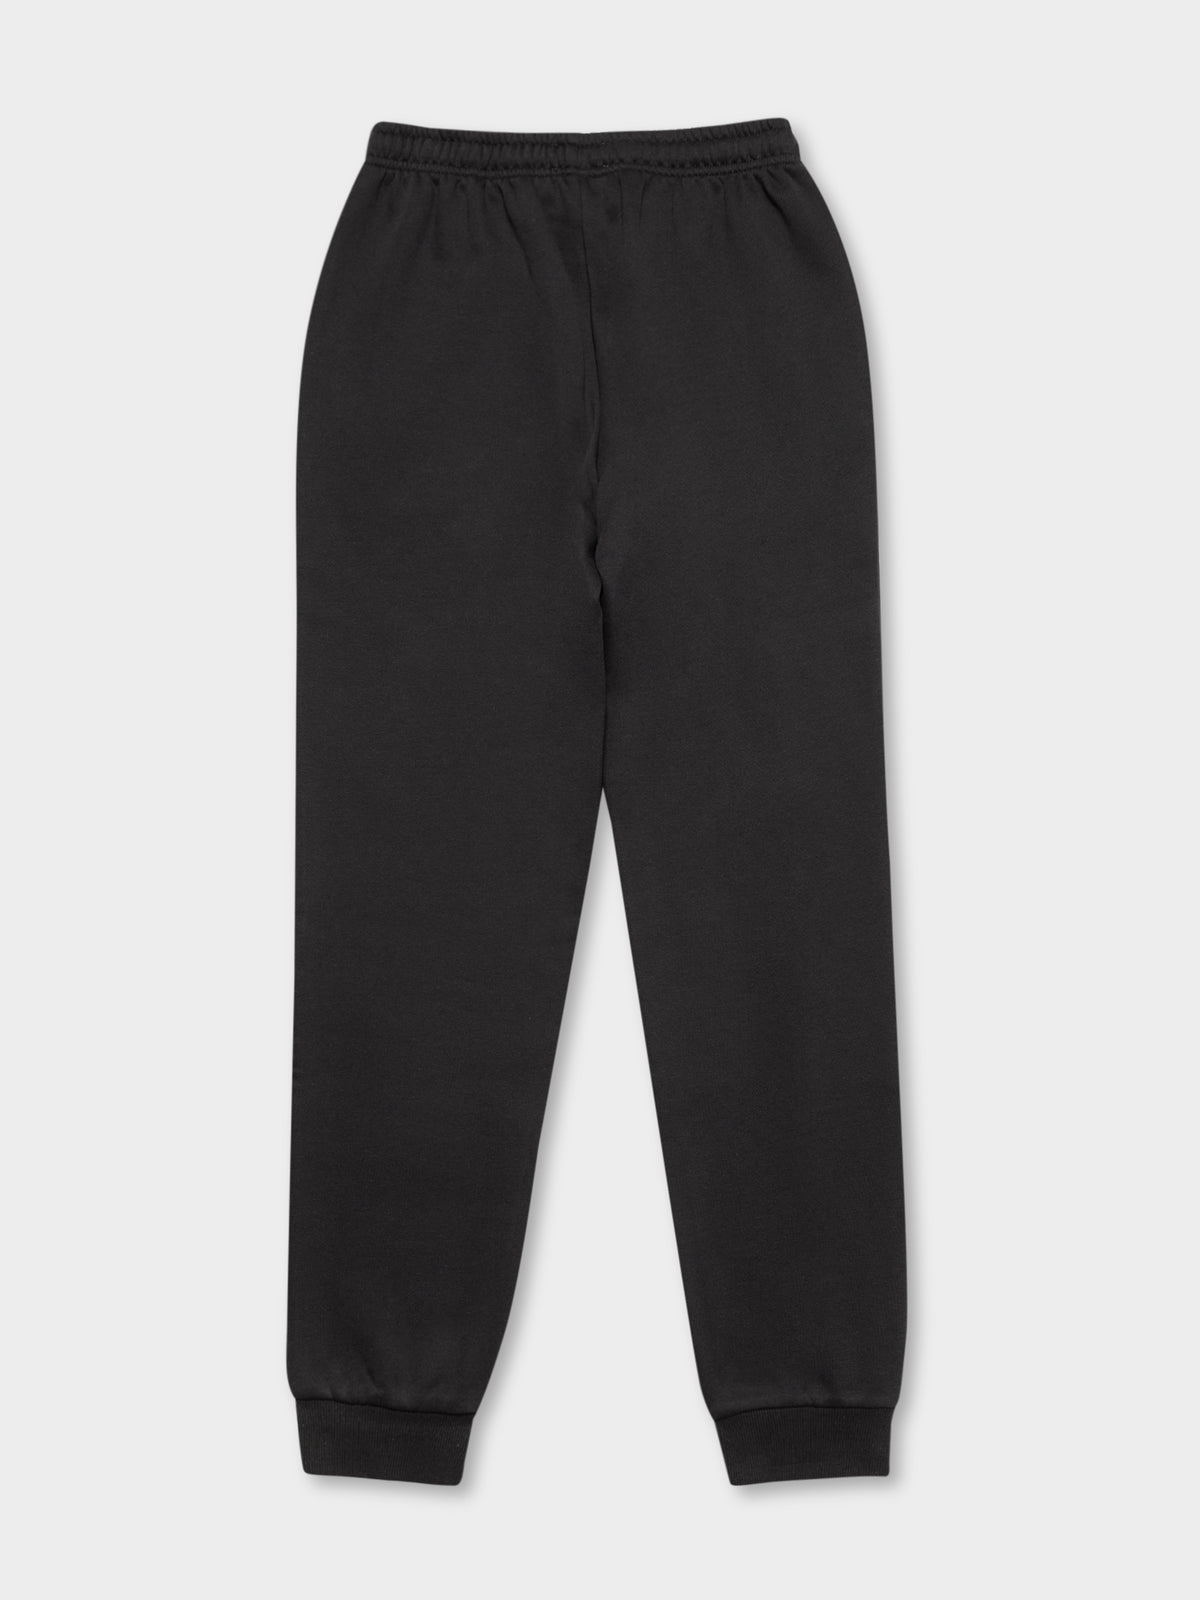 Carter Classic Trackpants in Coal